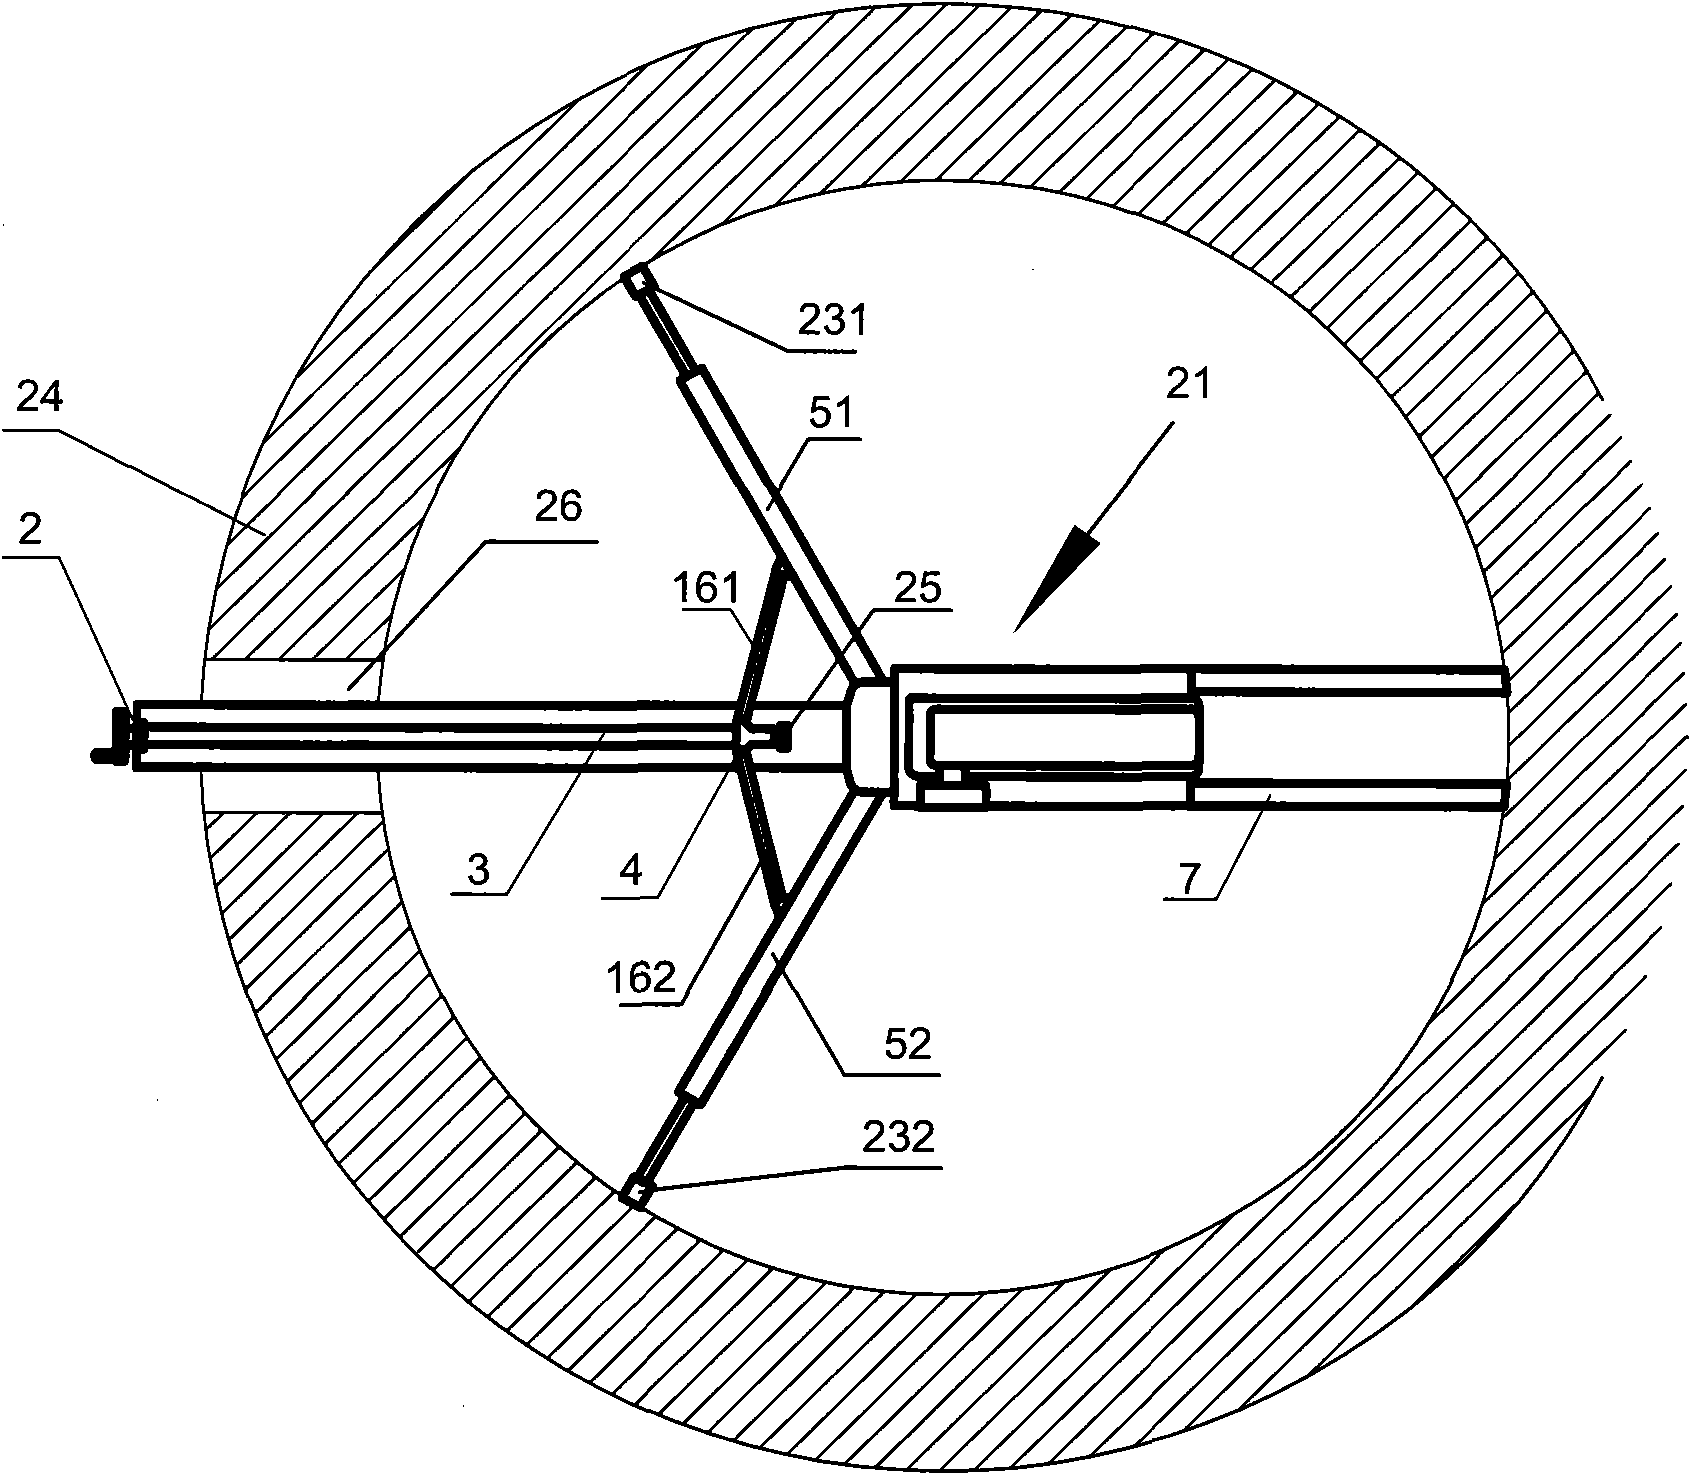 Closed circuit television inspection device